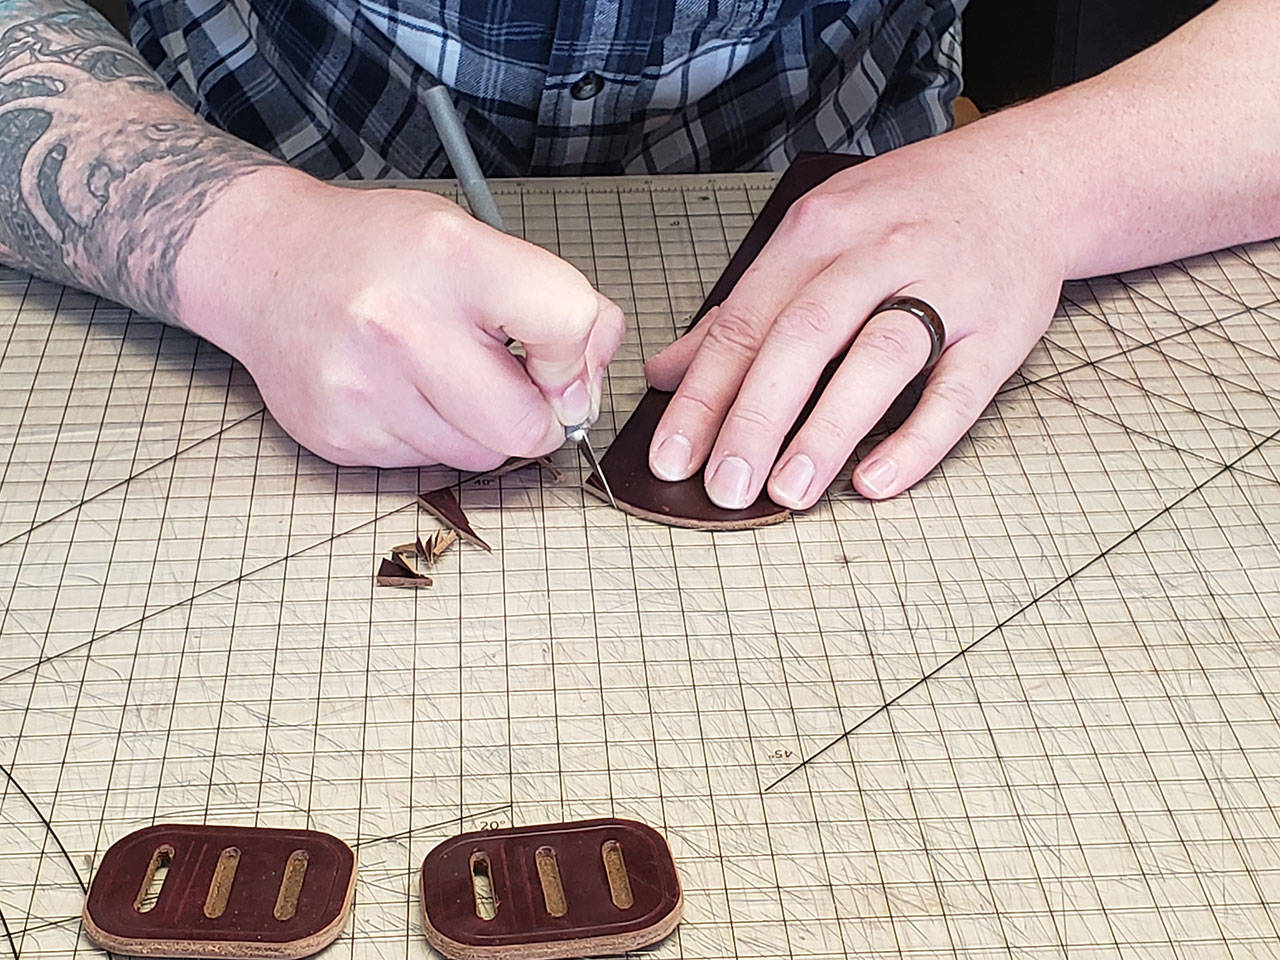 Patience and style is the key for local leathercrafter